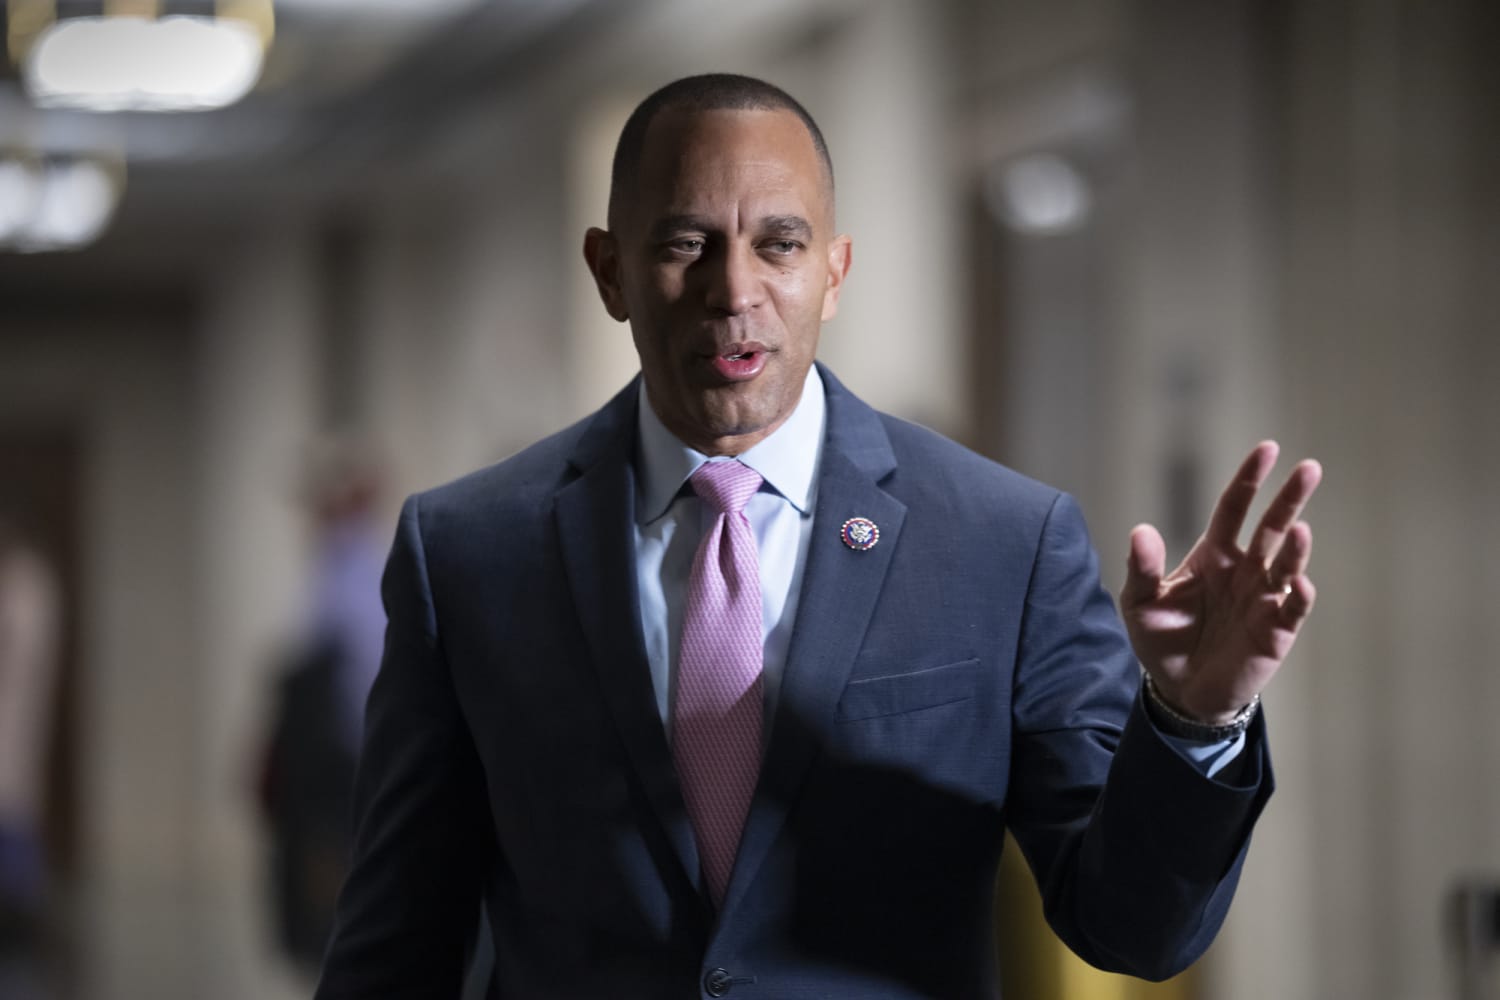 House Democrats elect Rep. Hakeem Jeffries as leader, the first Black person to lead congressional caucus